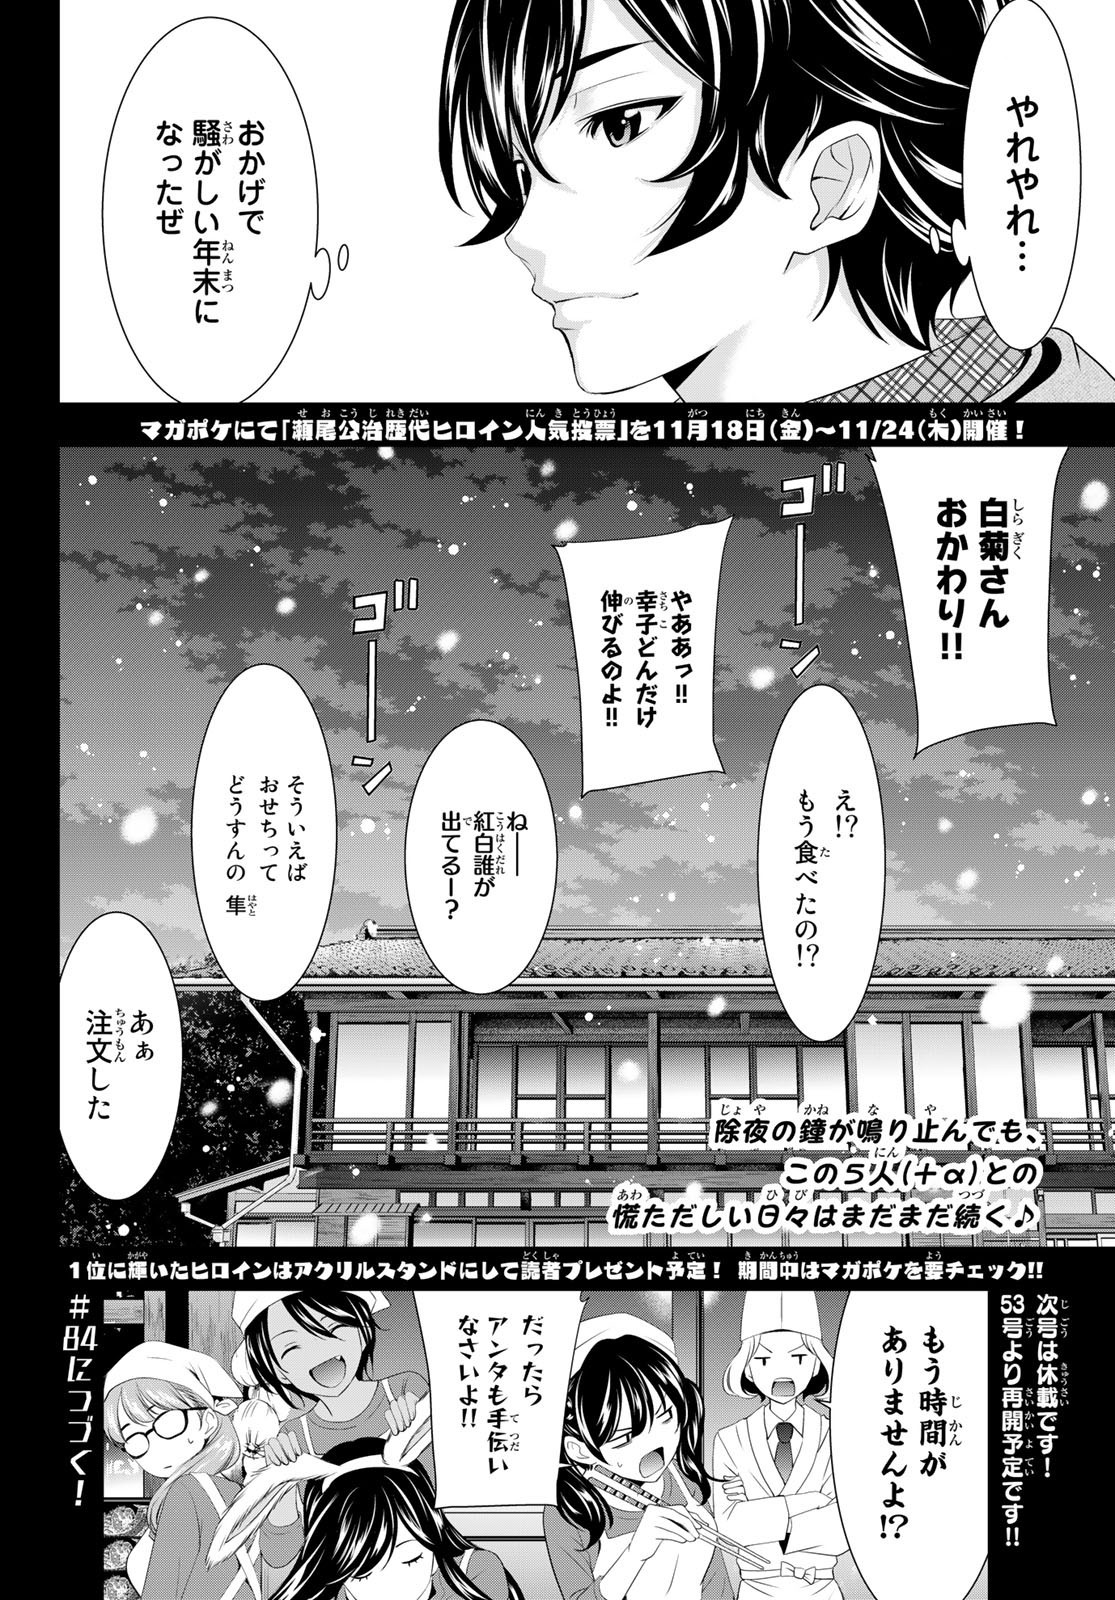 Goddess-Cafe-Terrace - Chapter 083 - Page 20